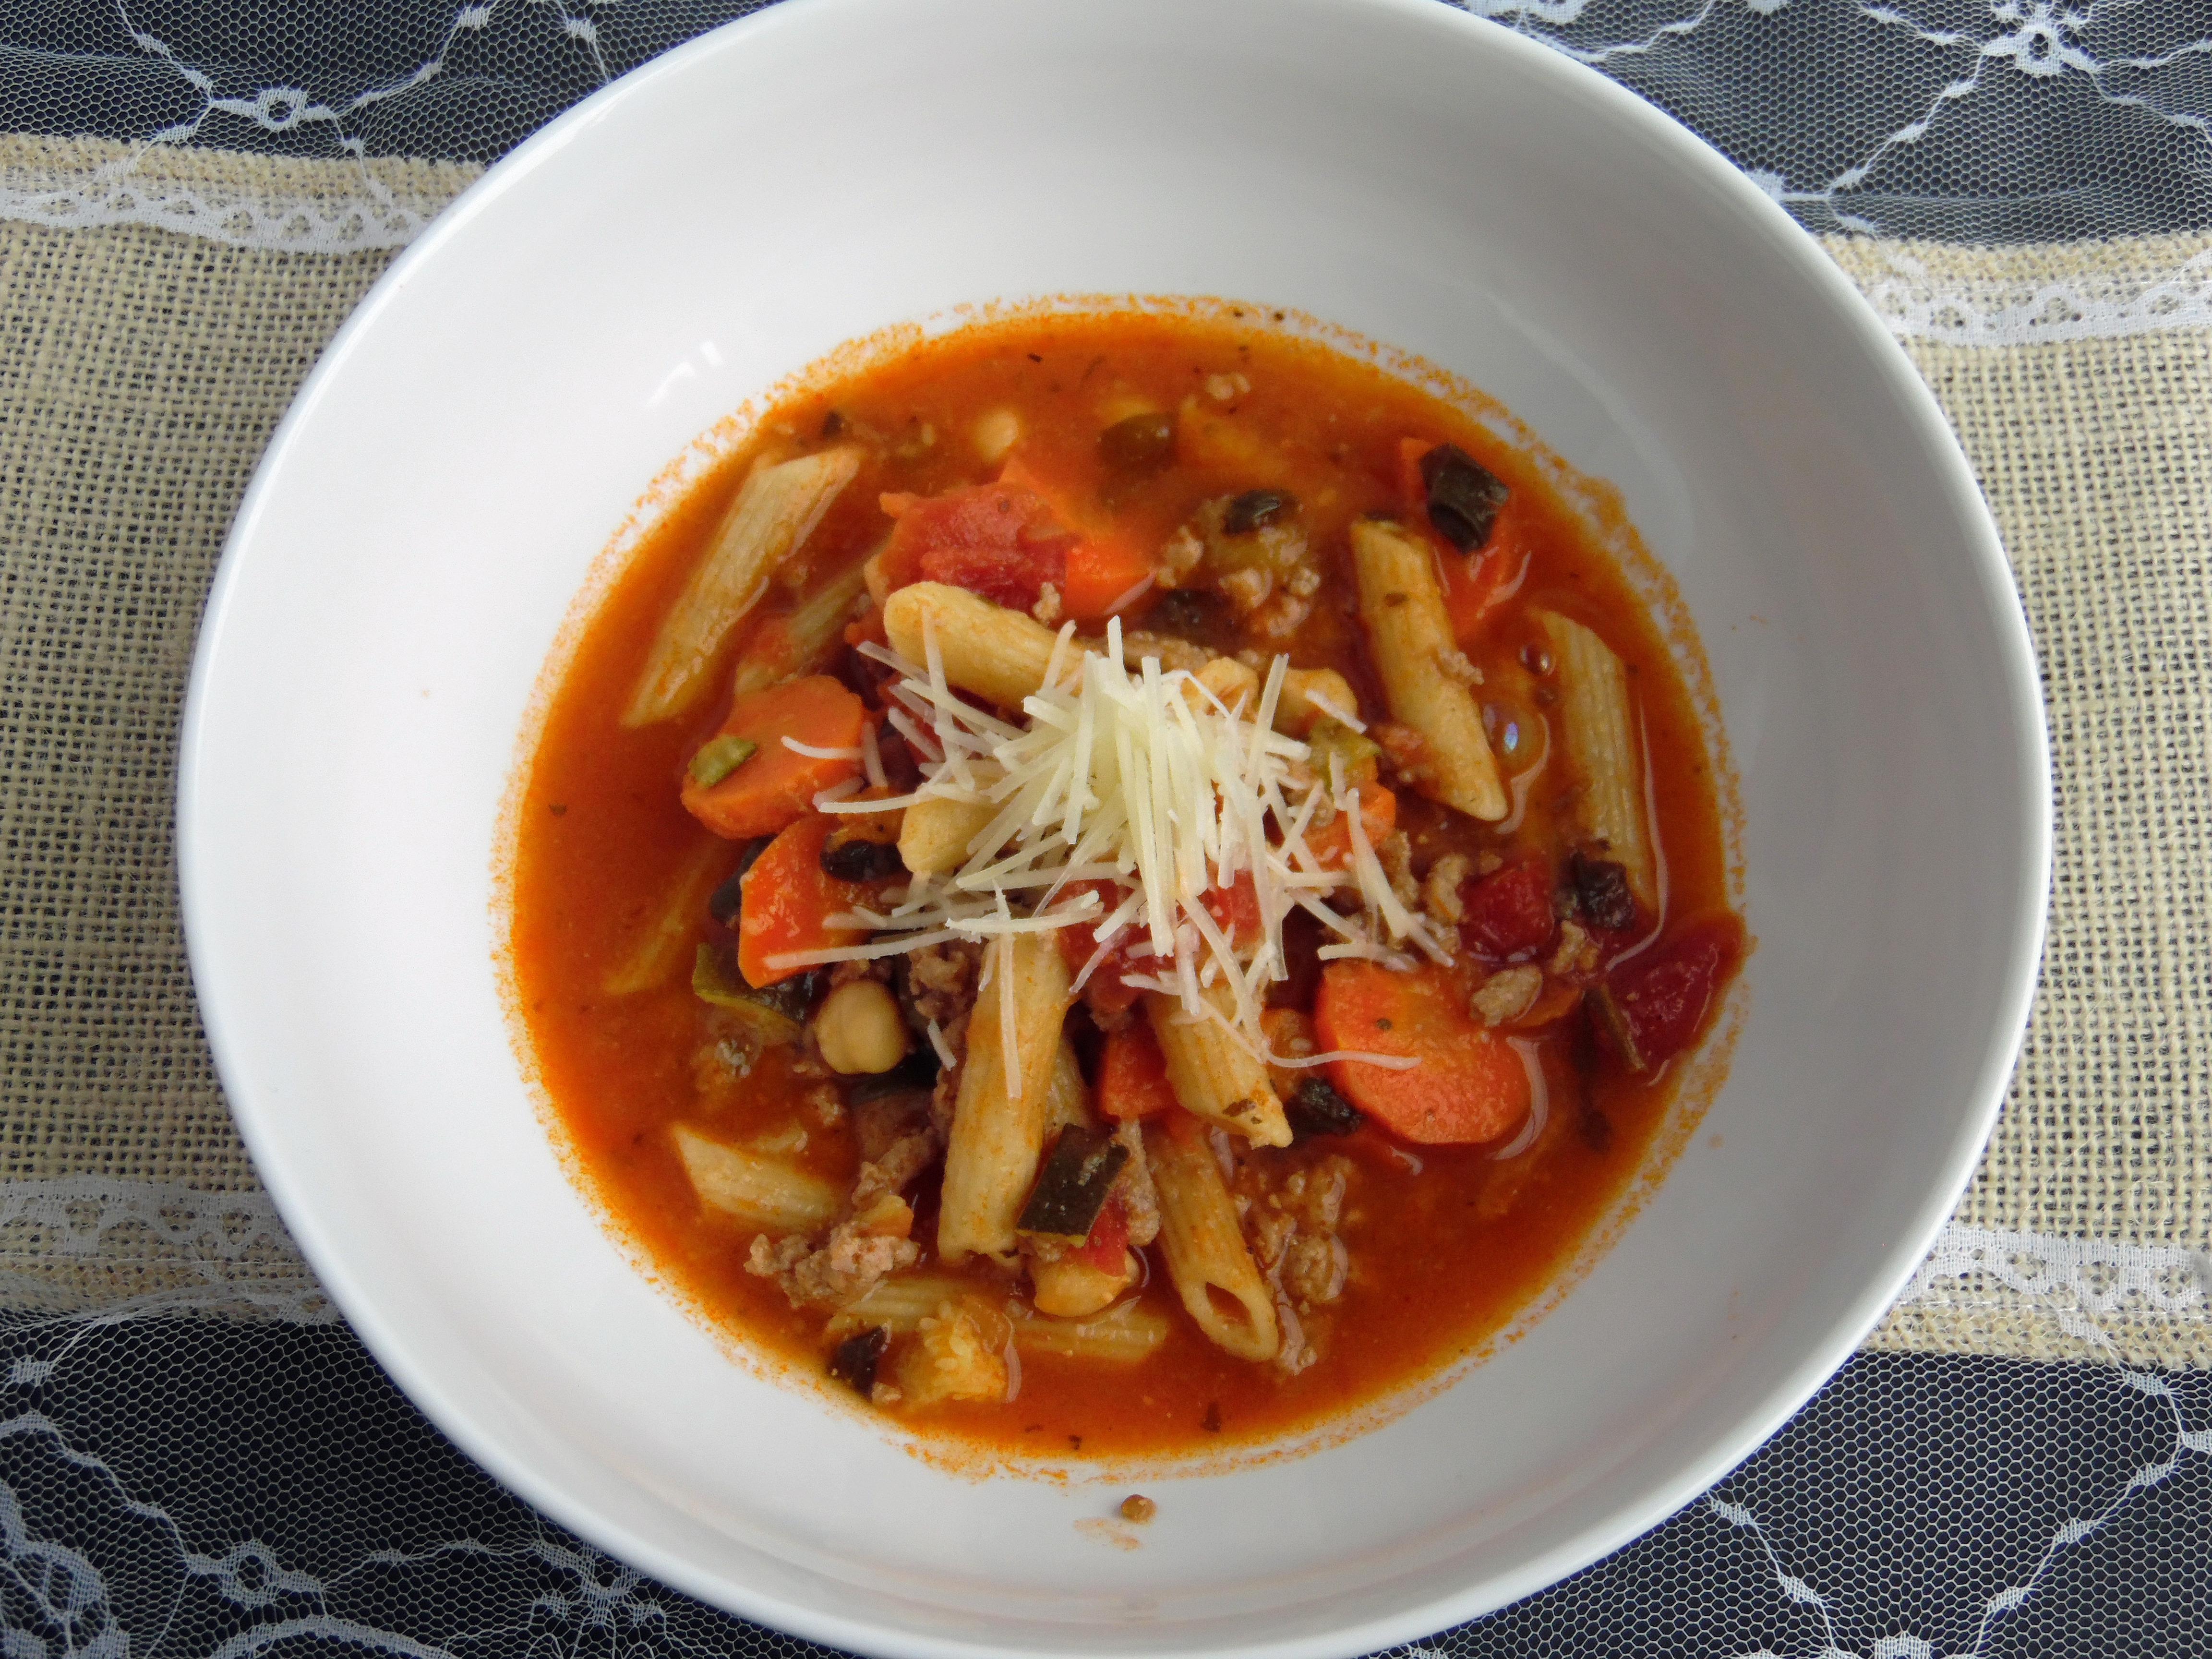 (Almost) Minestrone with Turkey – Instant Pot 10 Minute Meal